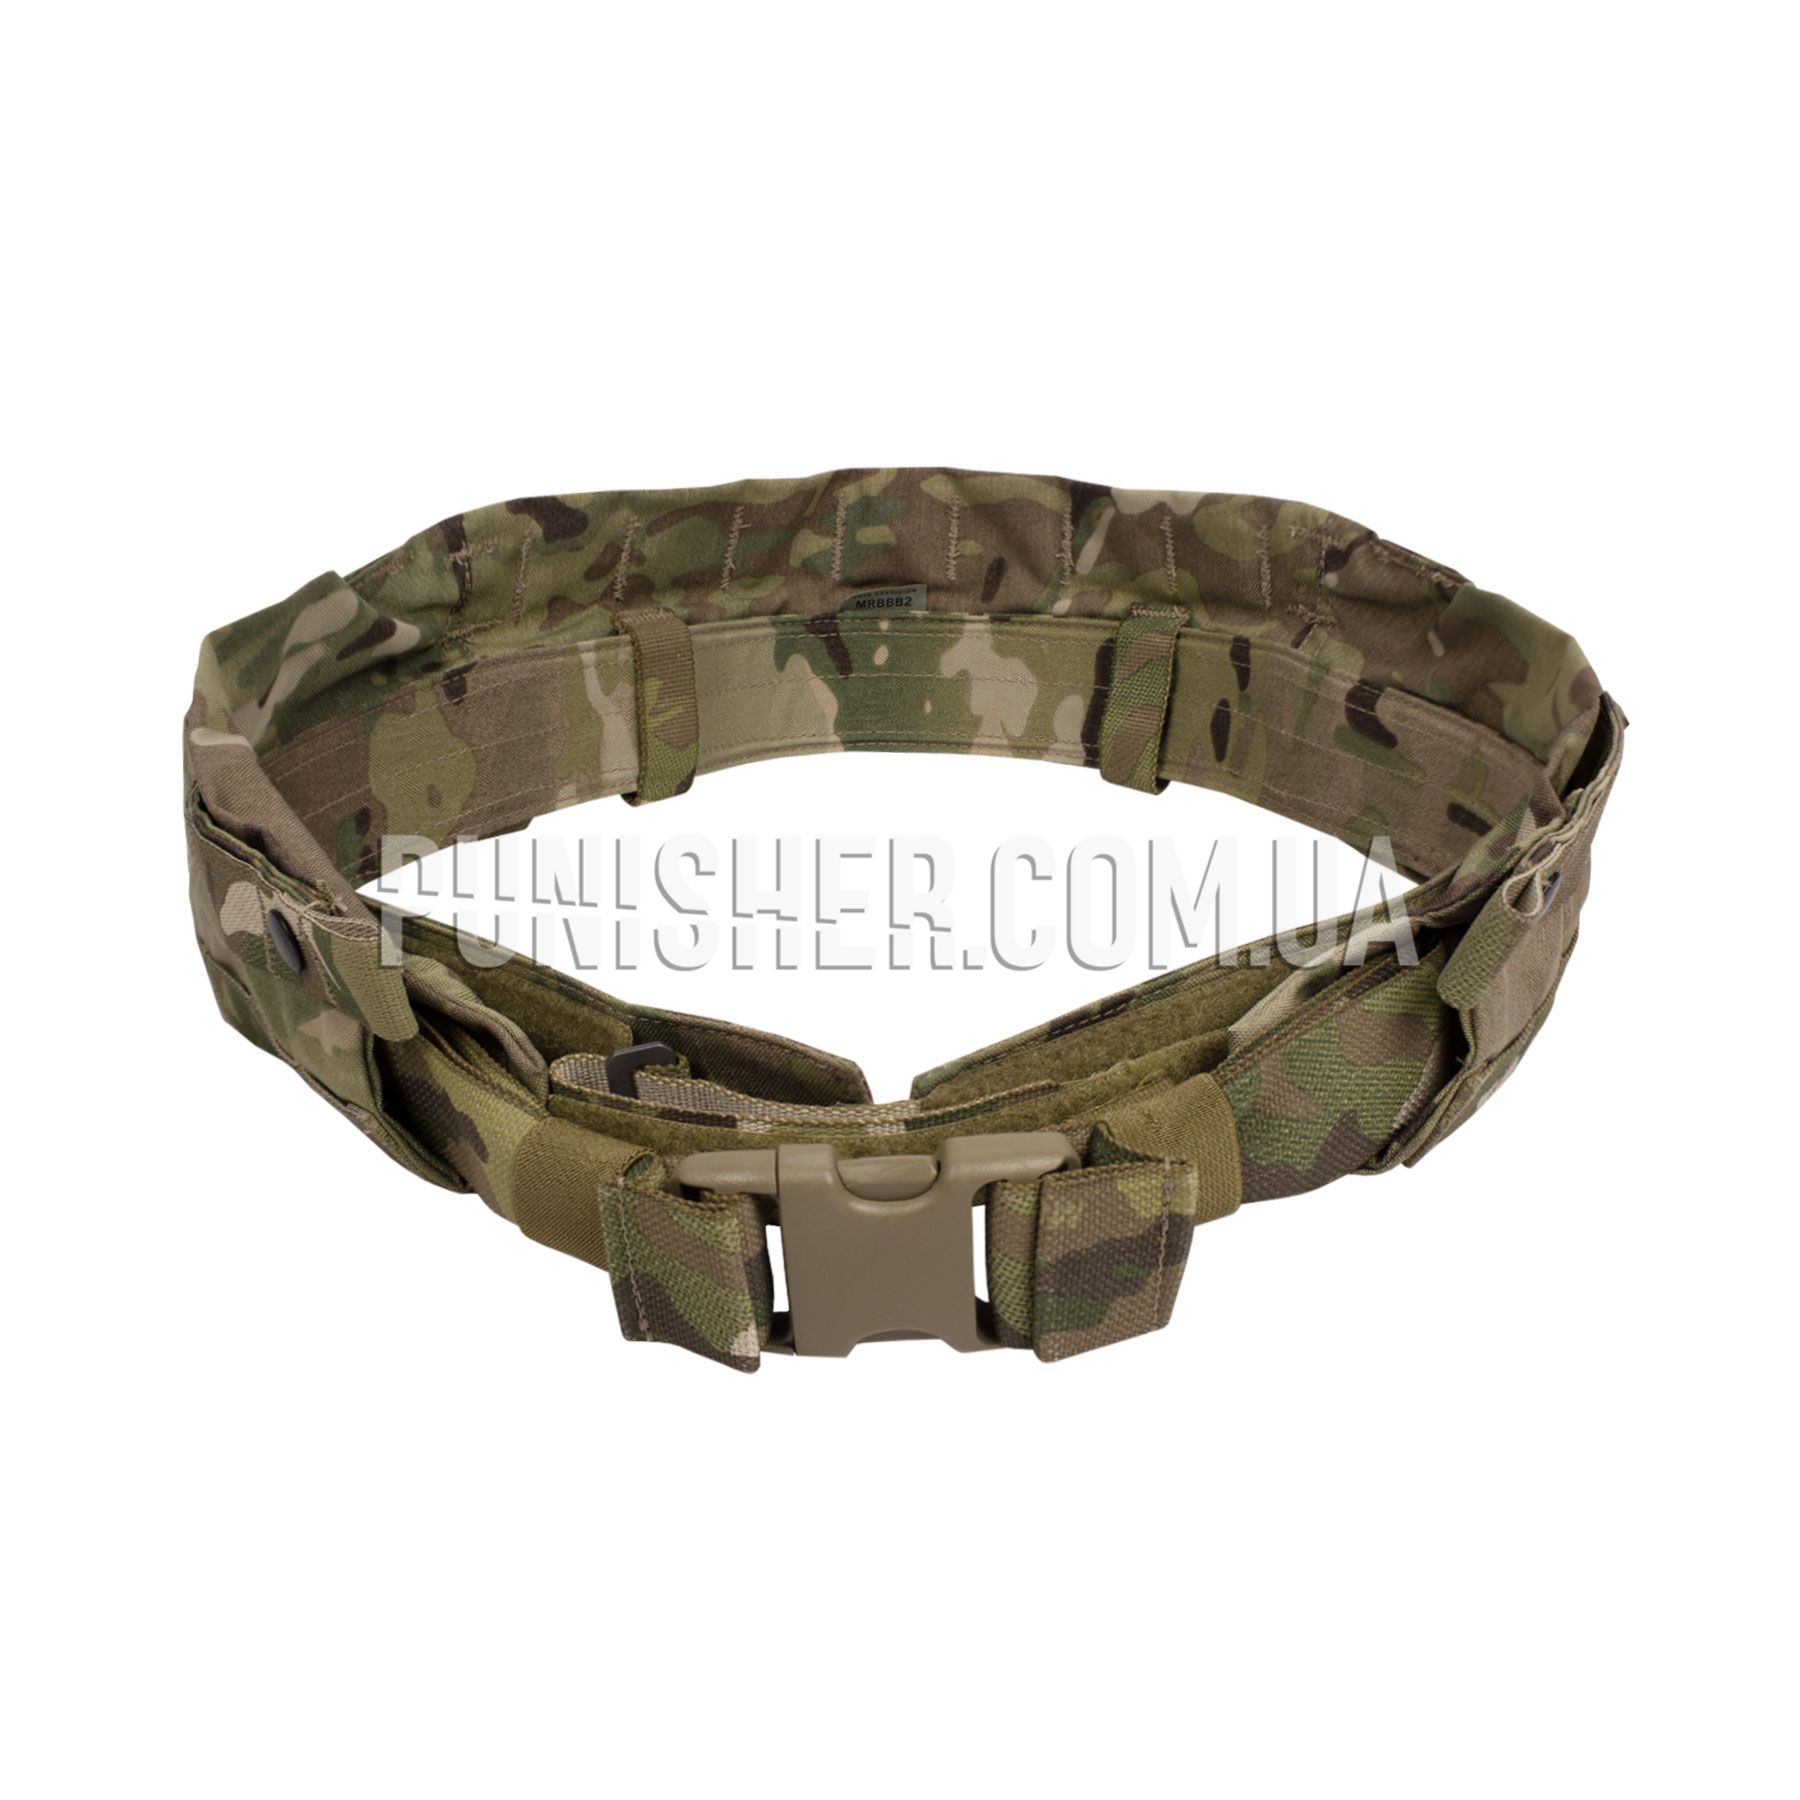 Crye Precision Modular Rigger's Belt (MRB) 2.0 Multicam buy with 